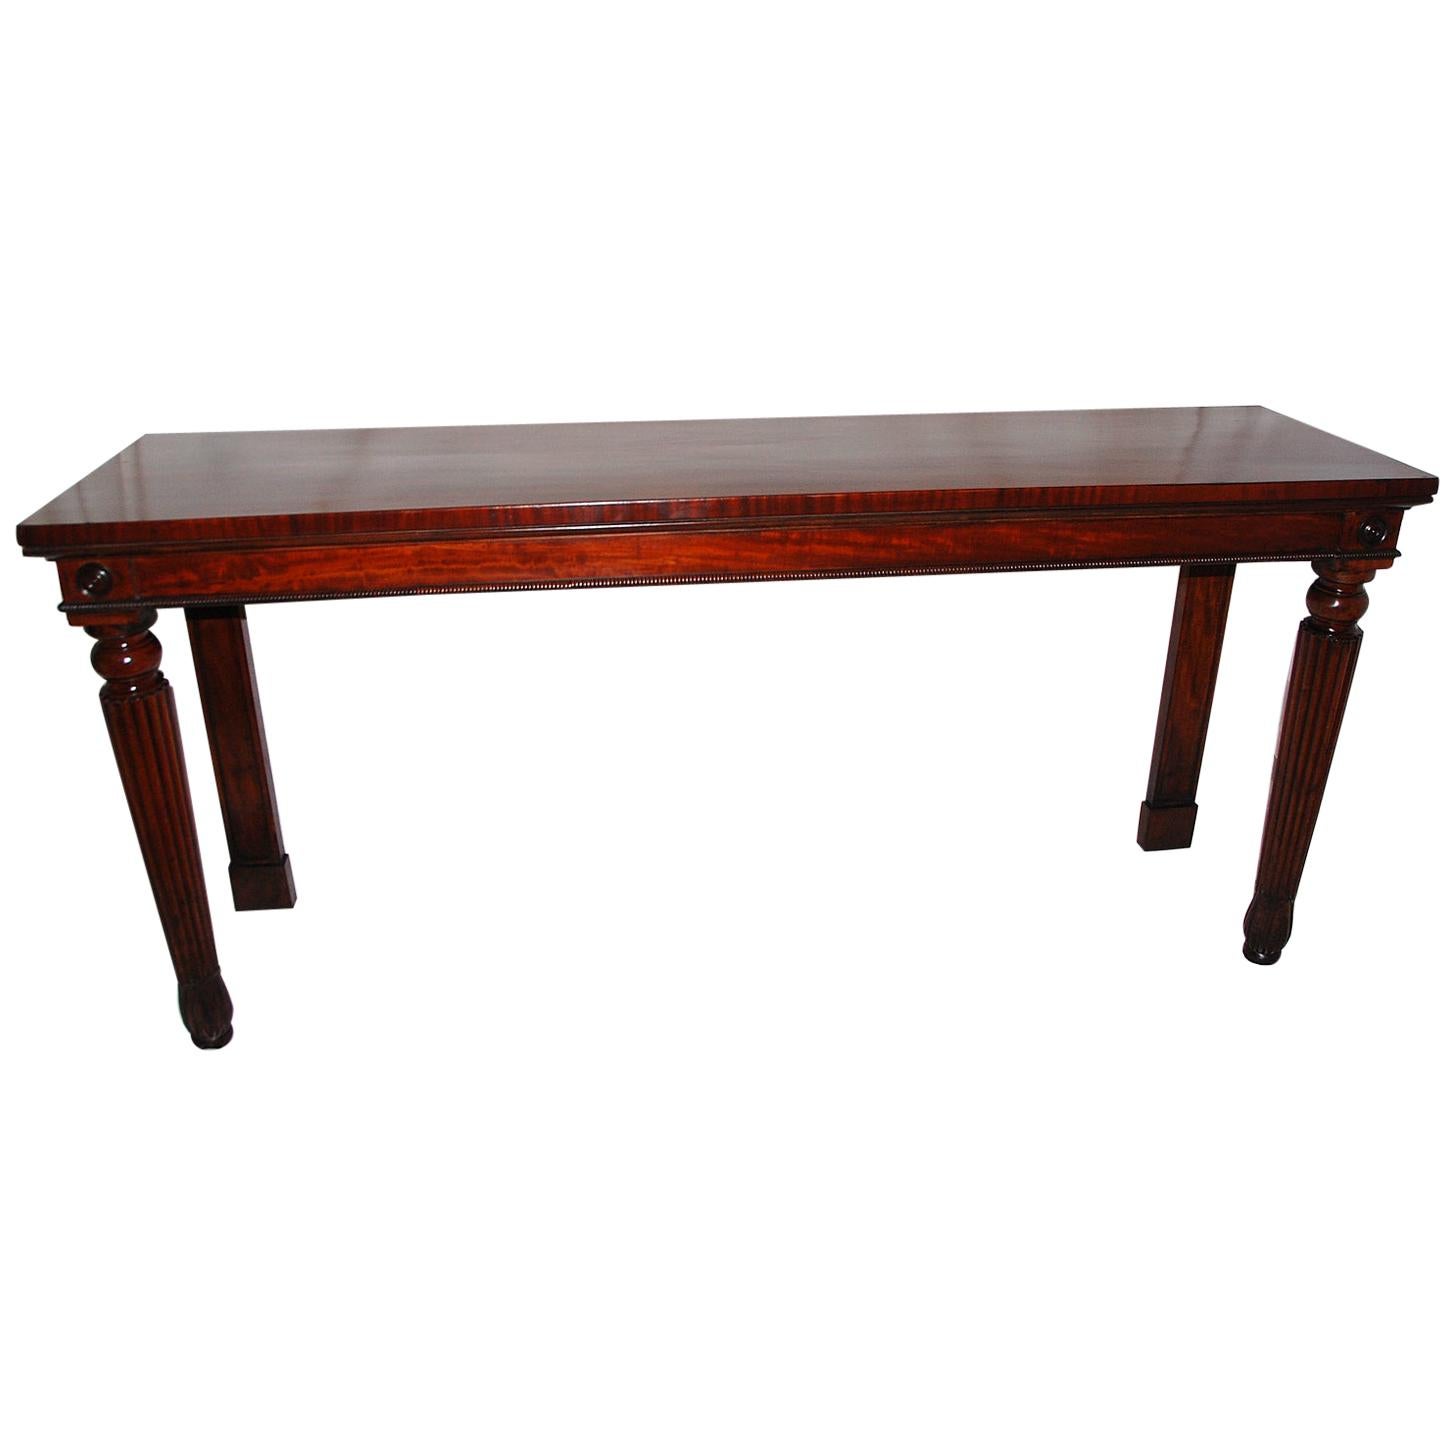 English Regency Period Long Mahogany Sideboard or Hall Table Reeded Legs